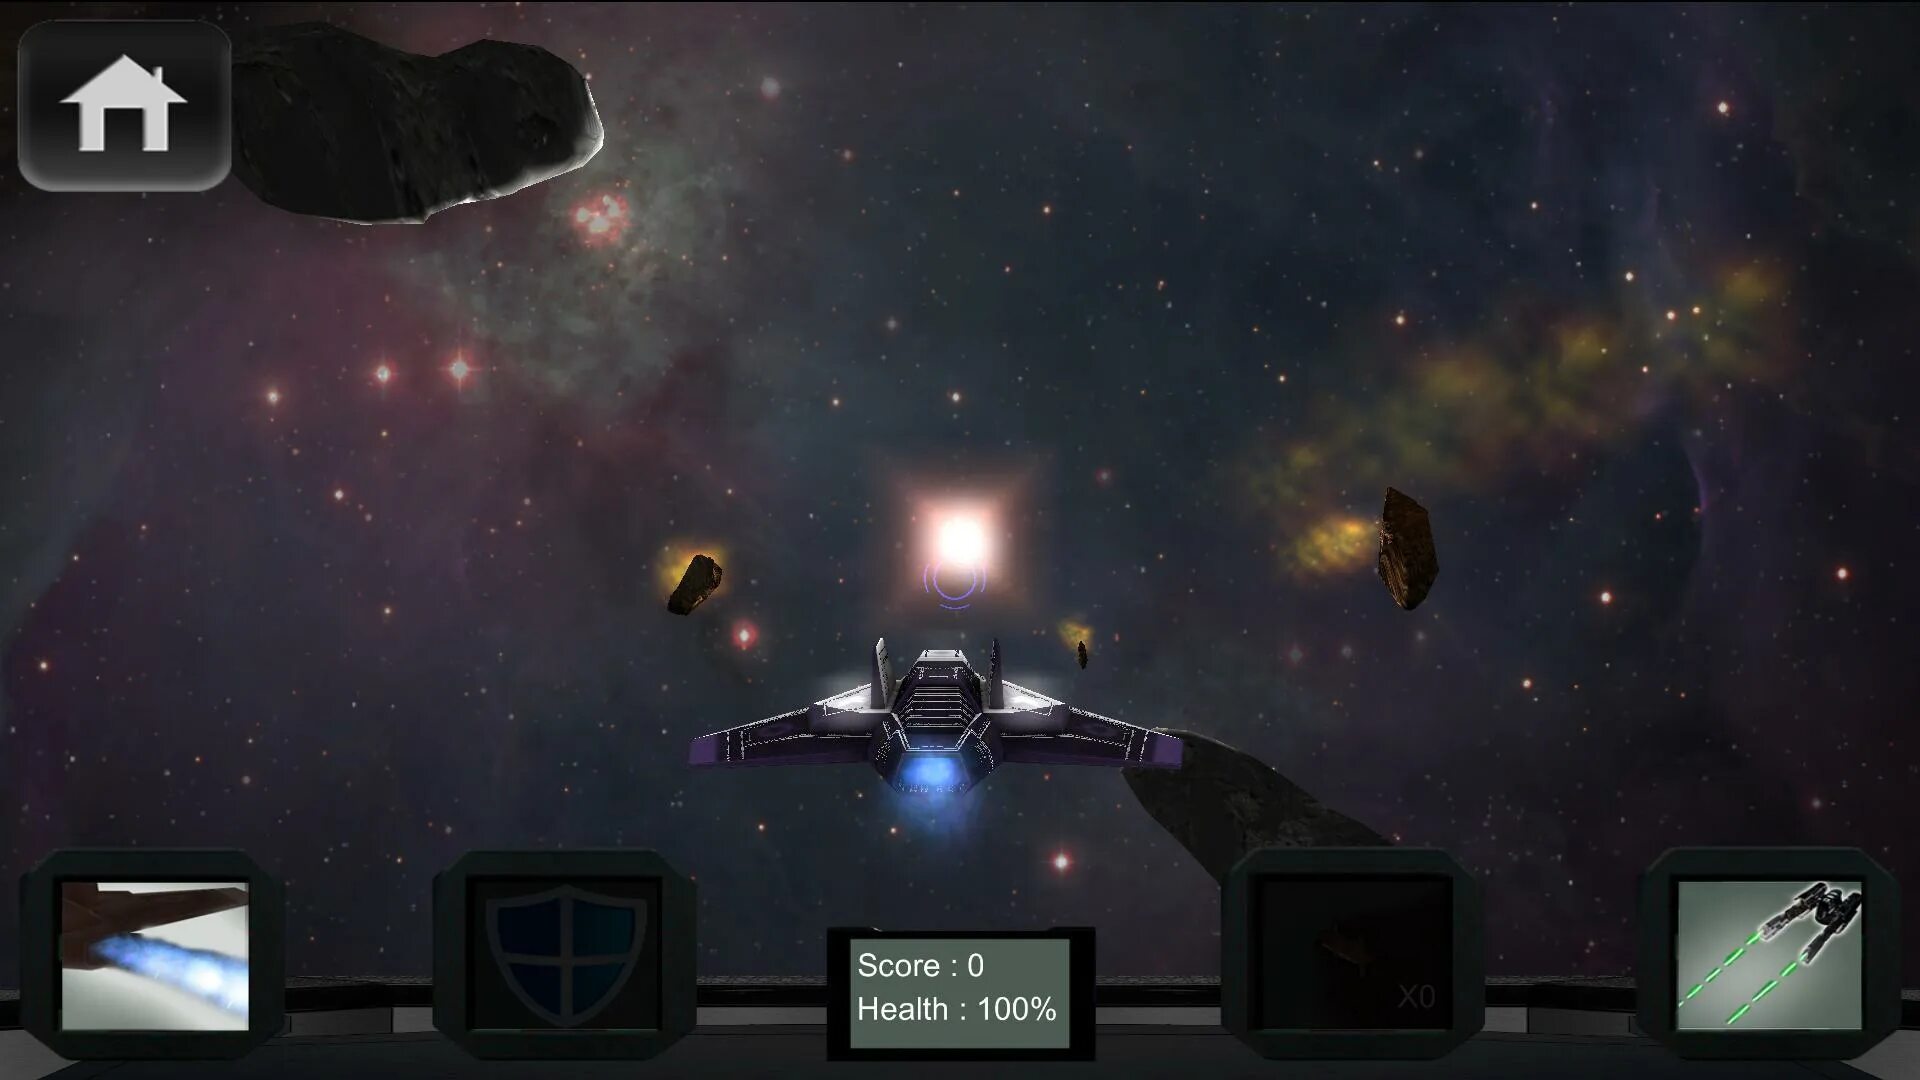 Space Fighter игра. Shoot 'em up космос истребитель. Endless Space Android. Last Space Fighter. Game space на андроид